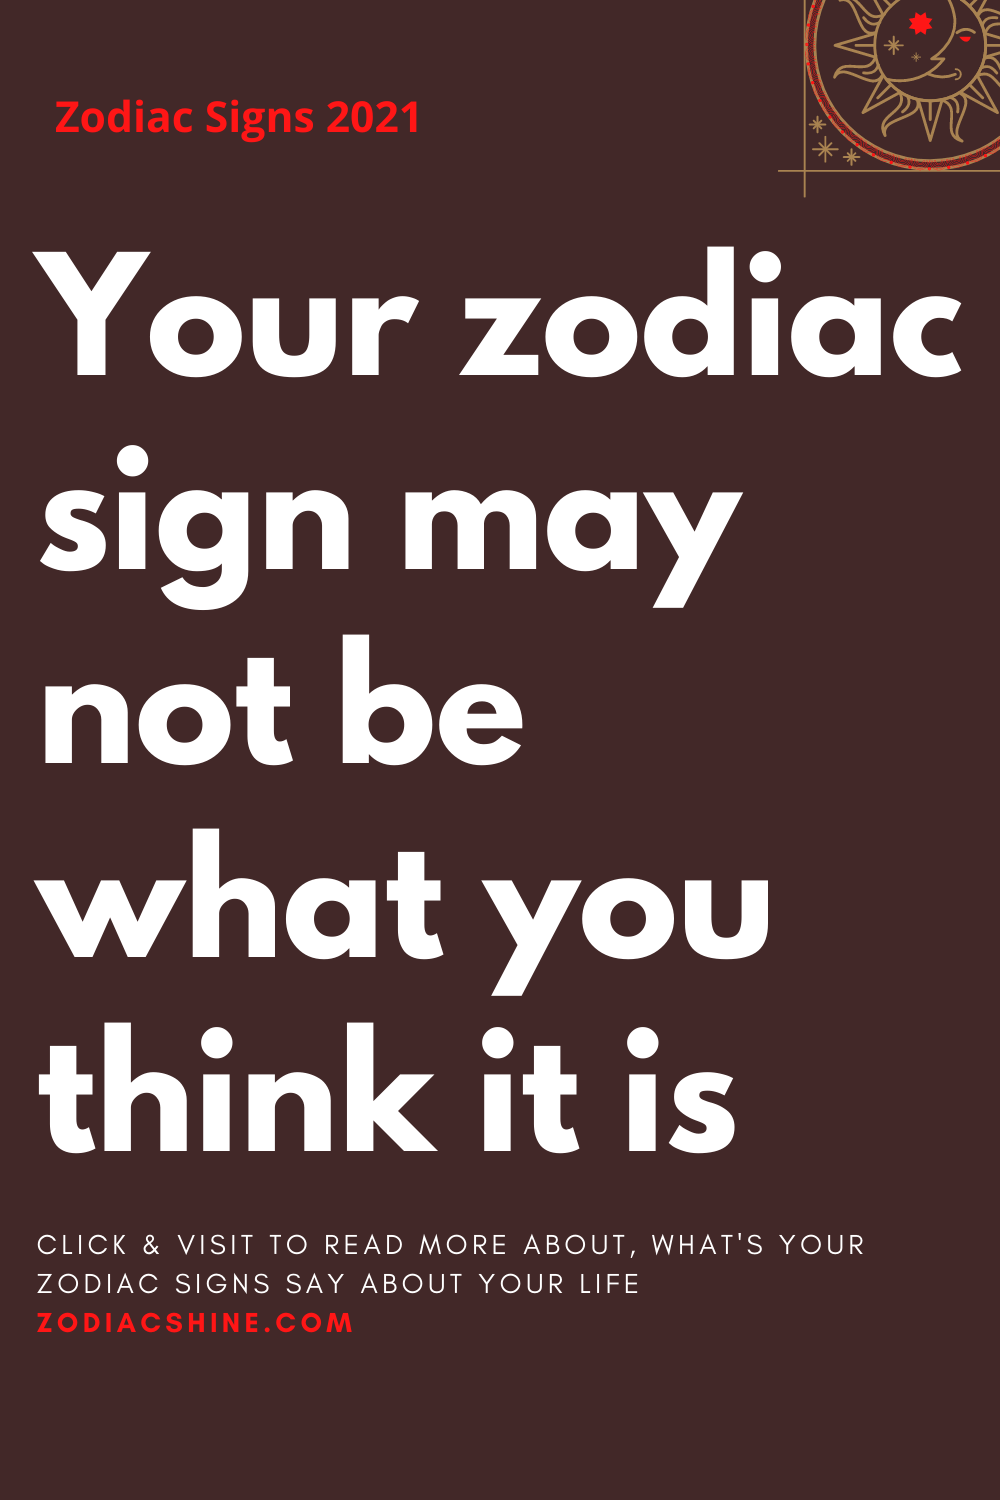 Your zodiac sign may not be what you think it is